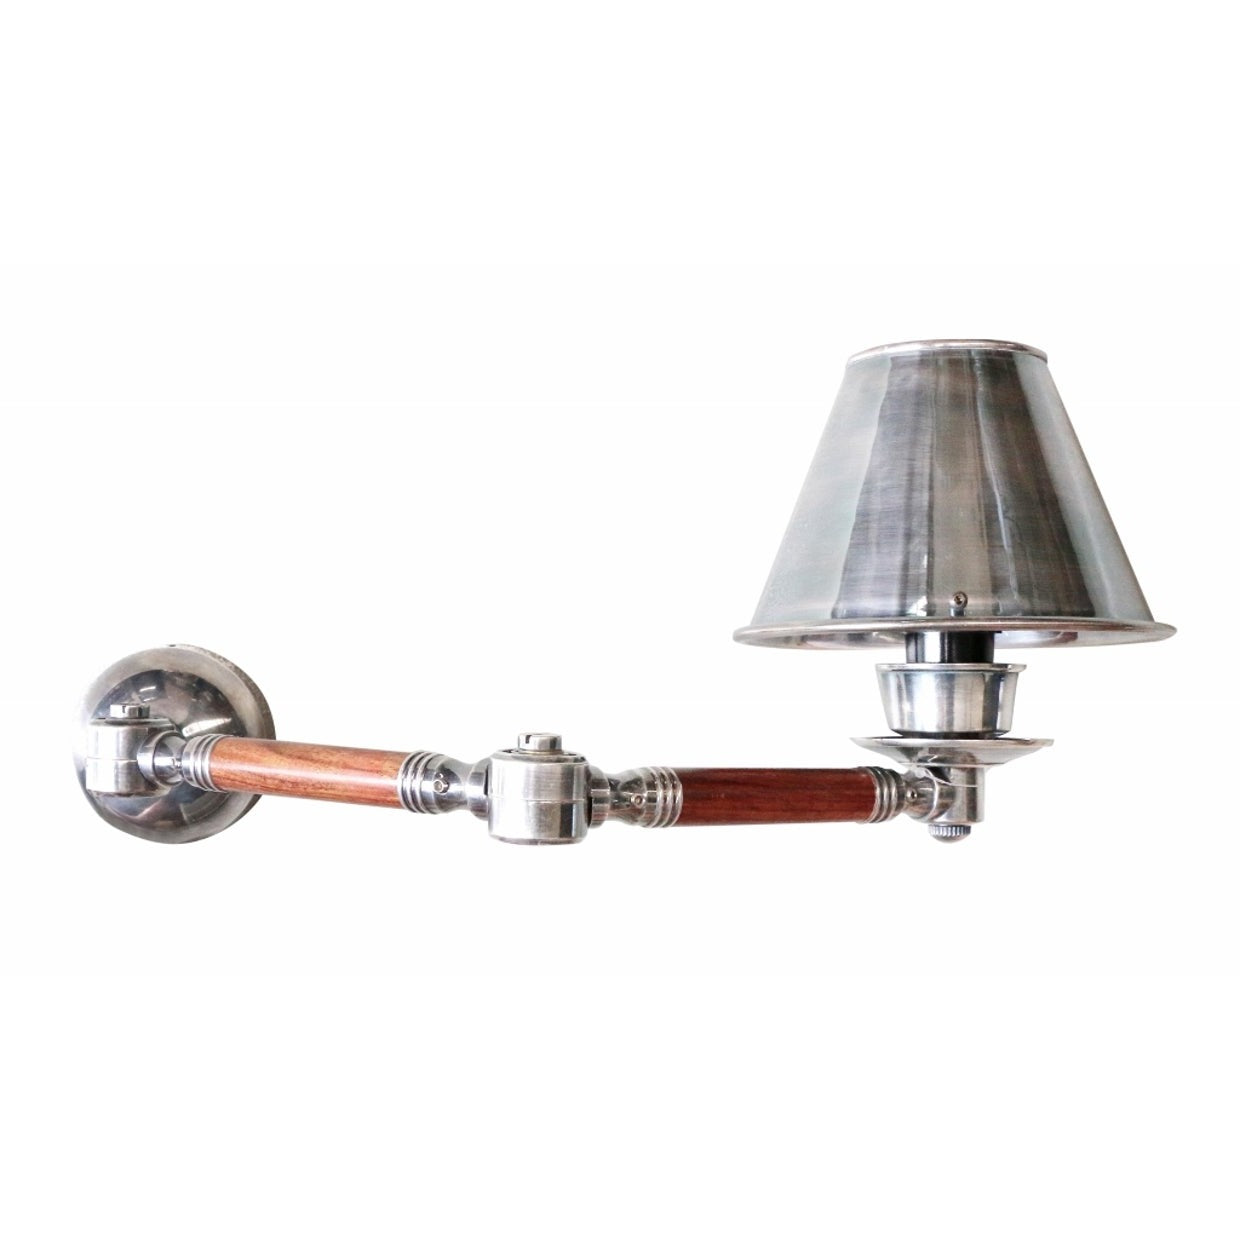 Wood Detail Wall Lamp with Pewter Style Shade